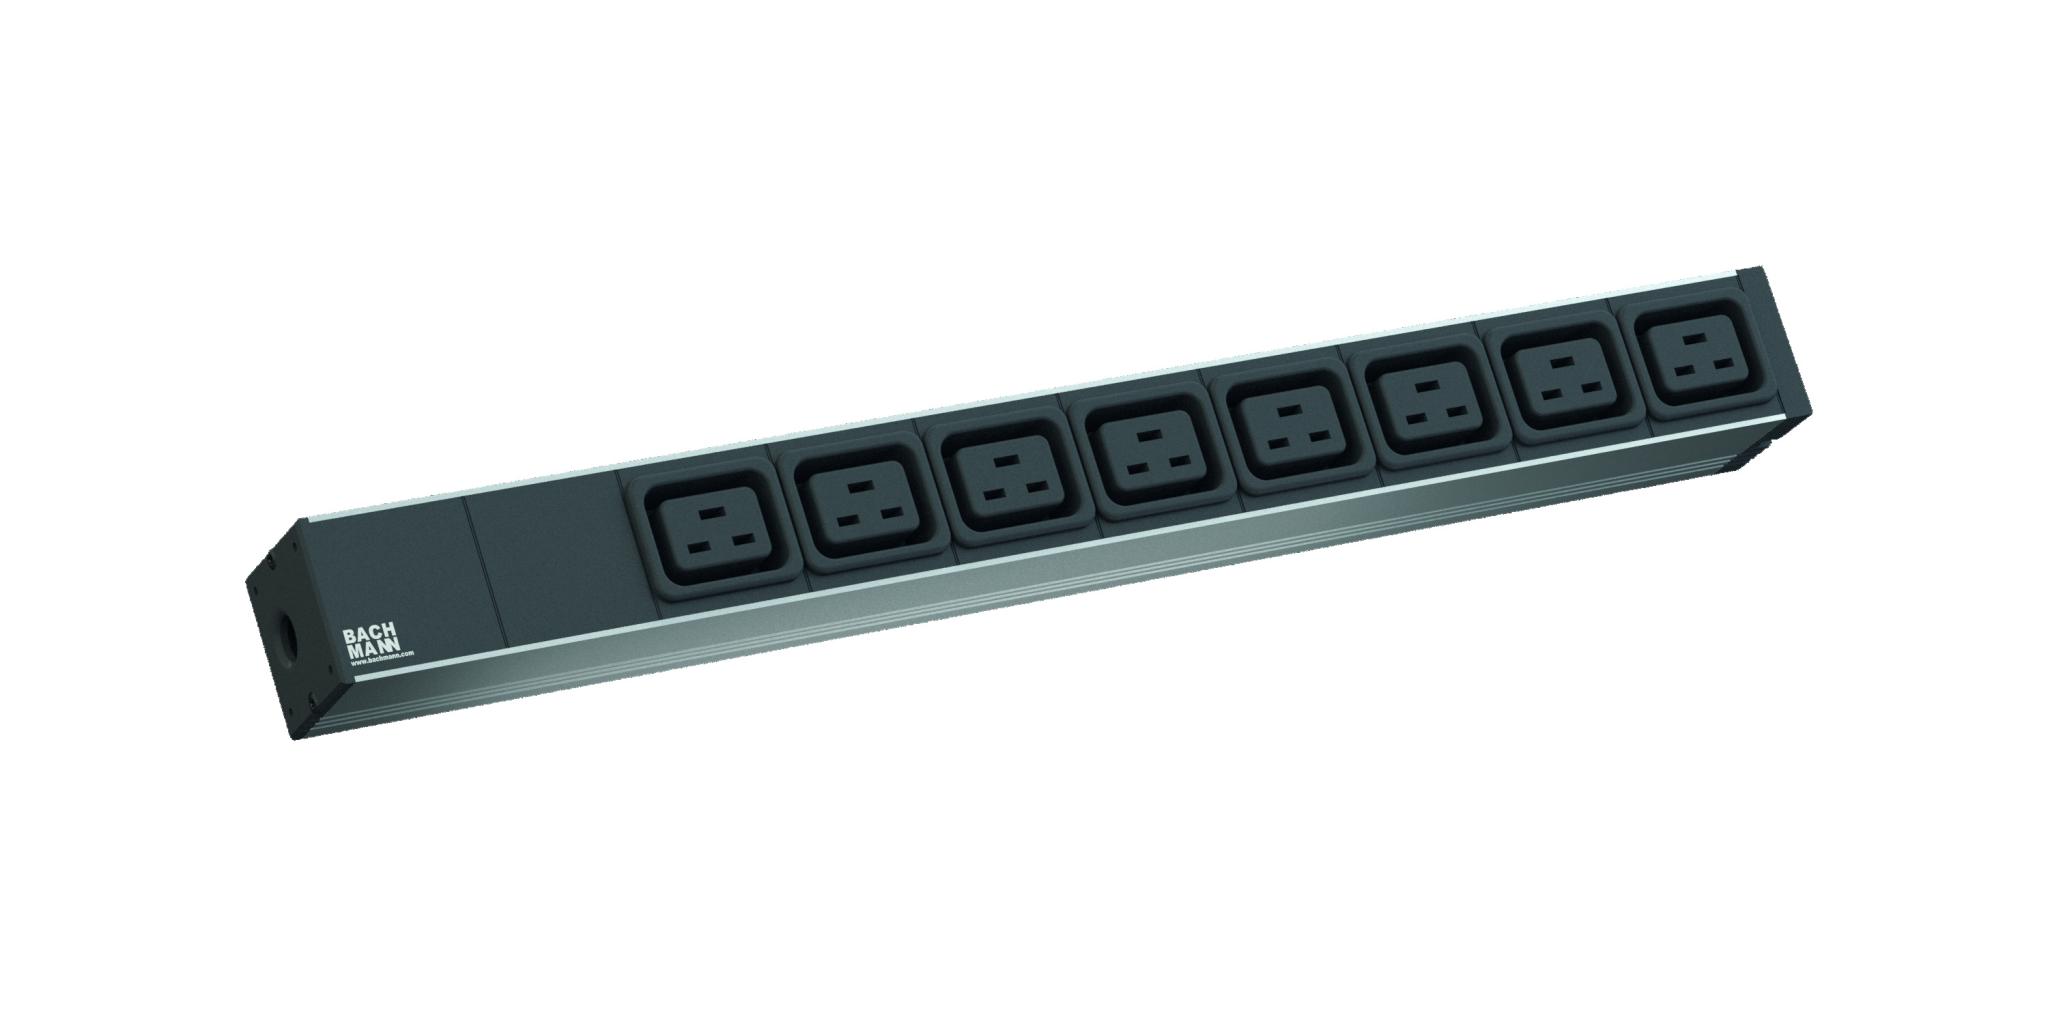 Bachmann prelungitor 19" 1HE 8xC19 cordon 2,0 m C20 ,0m C20; IT PDU Basic 1U (230V/ 50Hz); Plug: C20; 8x C19 socket outlets, black; Inside wiring with euro terminal; Power supply: 2,0m H05VV-F 3G 1,50 mm²; Rated voltage: 230V; Incl. 2x mounting metal flanges; End caps screwed, rewireable; Profile